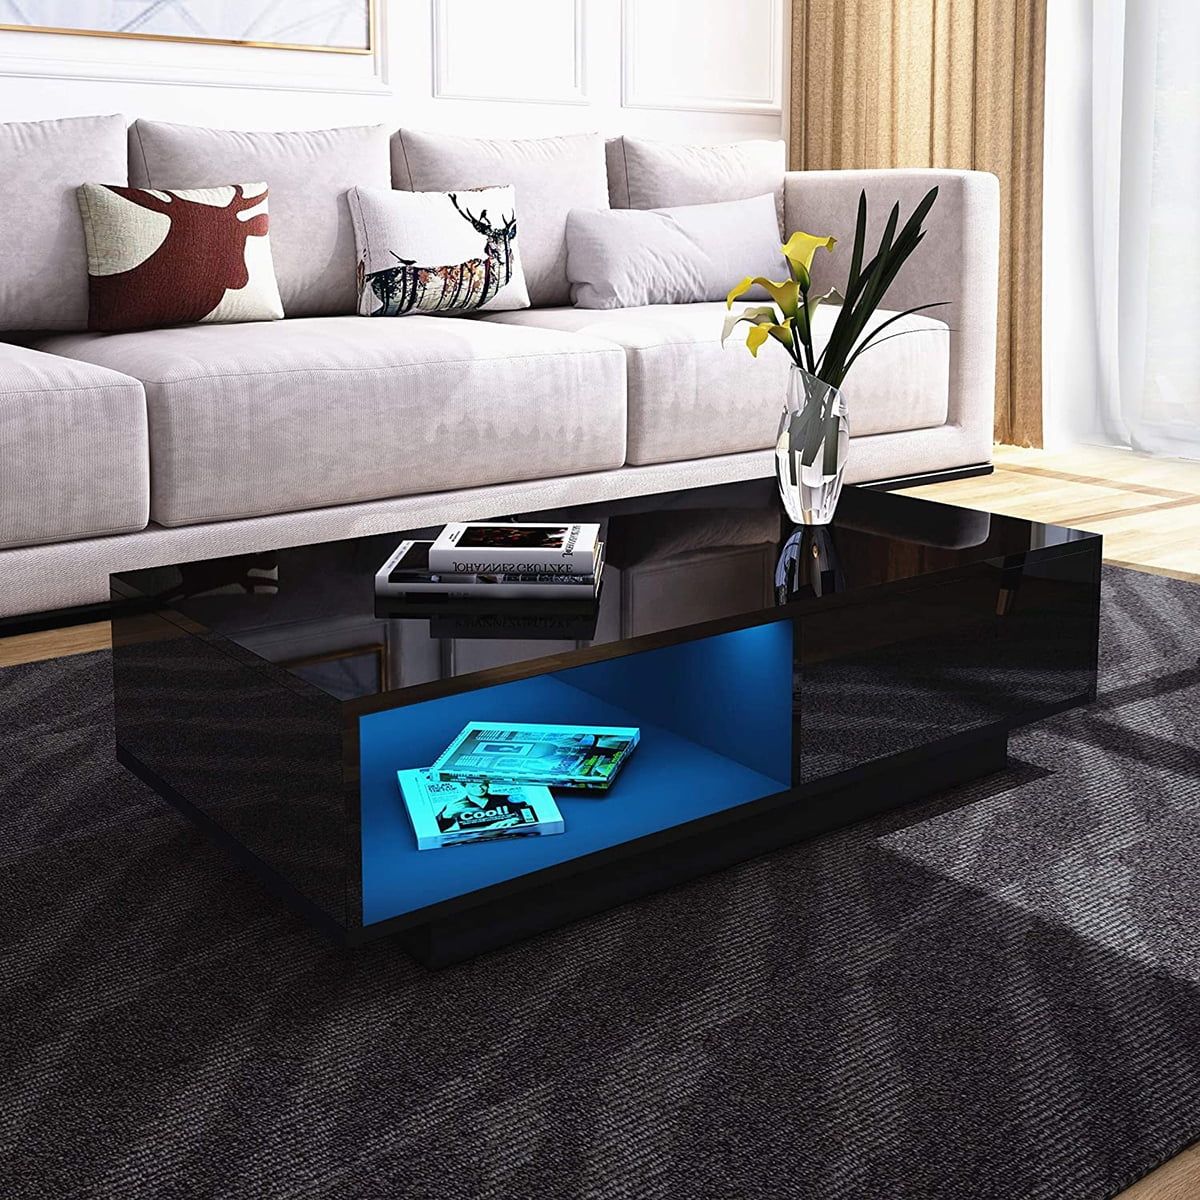 Modern High Gloss Coffee Table With Drawers, Led Sofa Side End Desk Inside Coffee Tables With Drawers And Led Lights (Gallery 6 of 20)